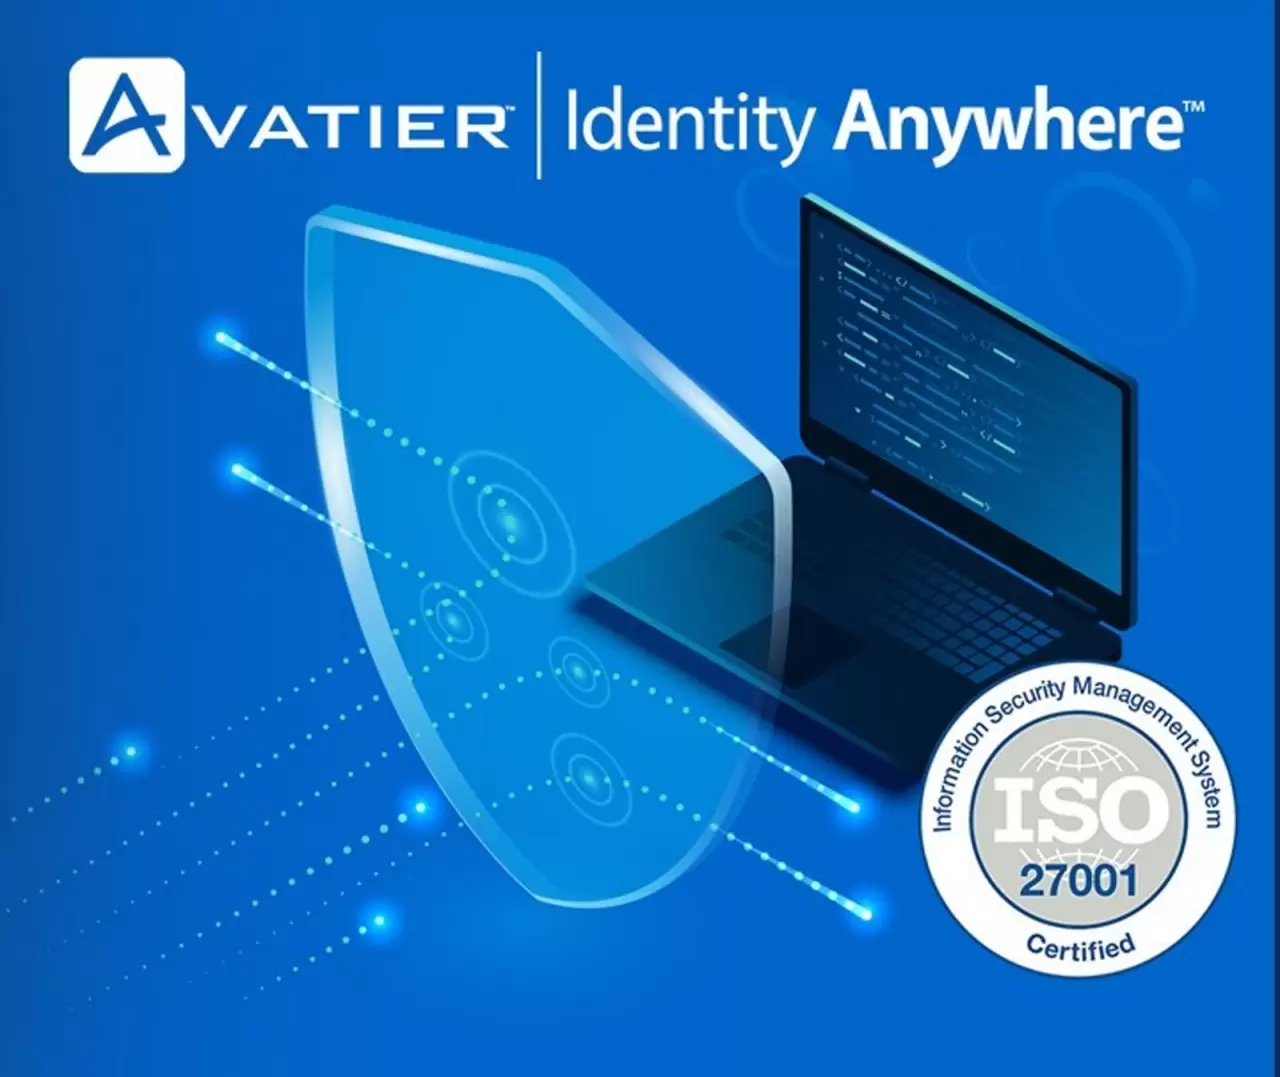 Avatier's Information Security Management System (ISMS) has received ISO 27001:2013 certification. img#1